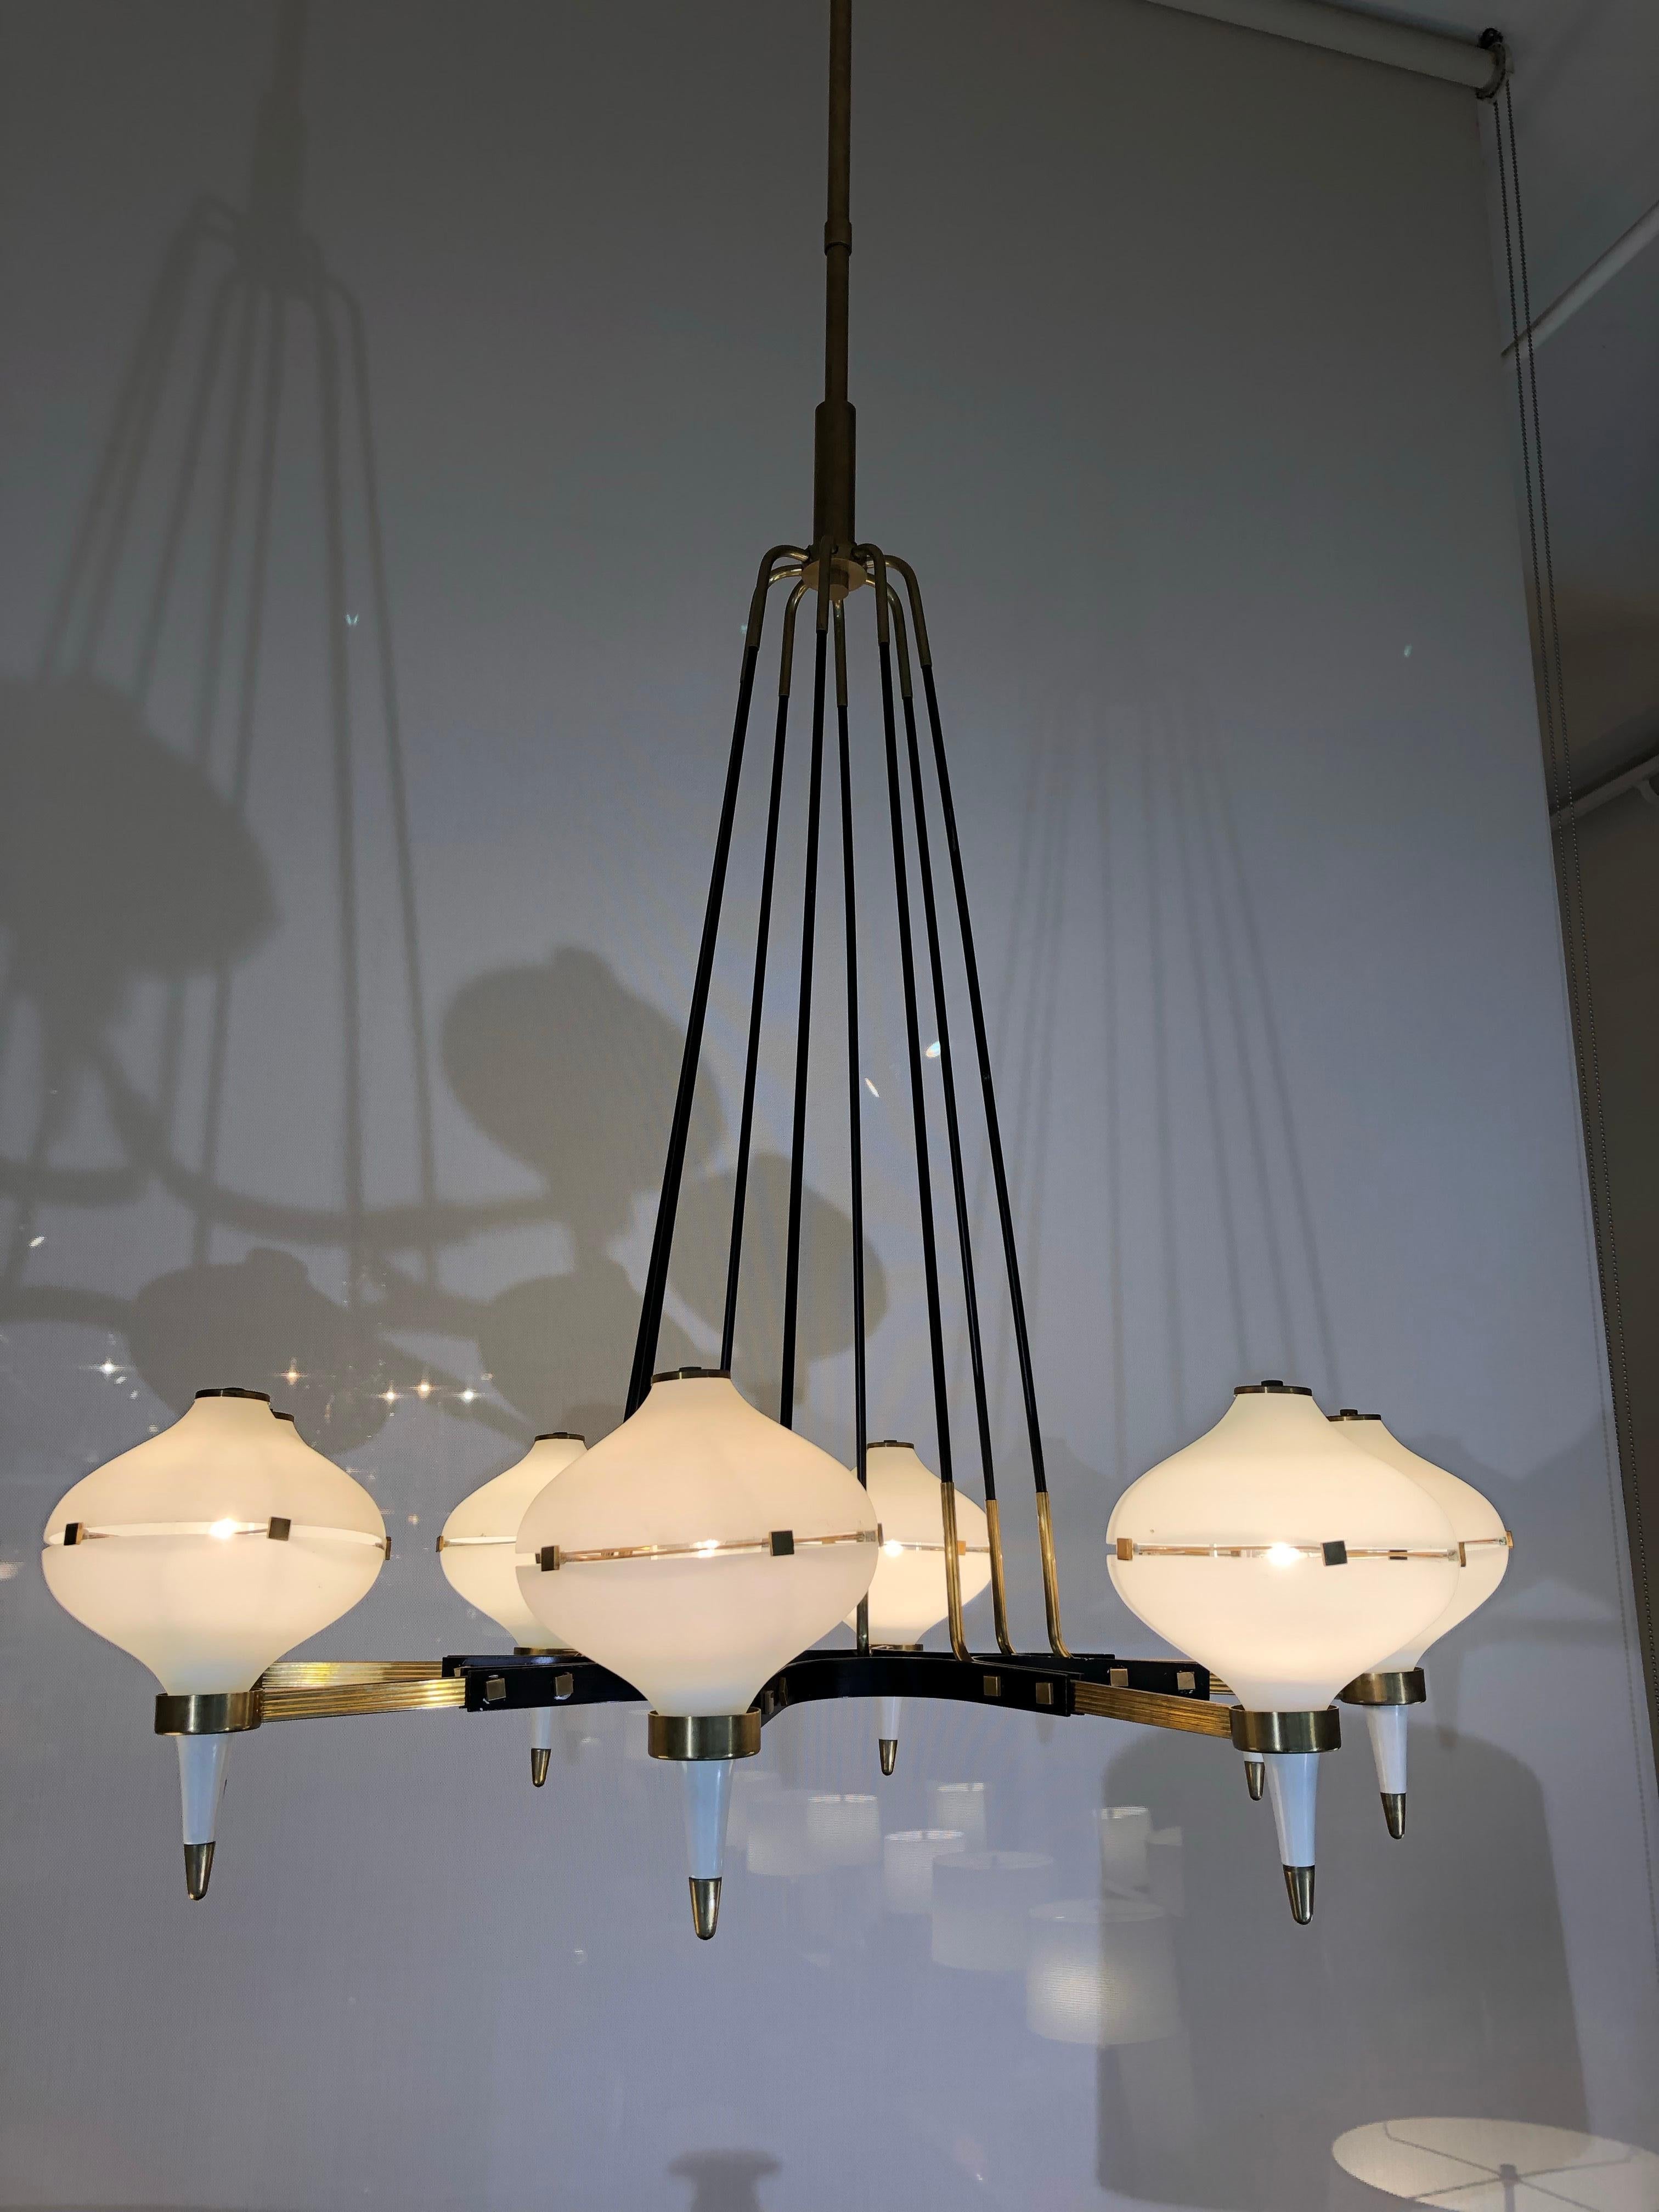 A modernist eight-light chandelier attributed to Stilnovo.
Patinated brass, black enamel and frosted glass.
Fully rewired and restored.